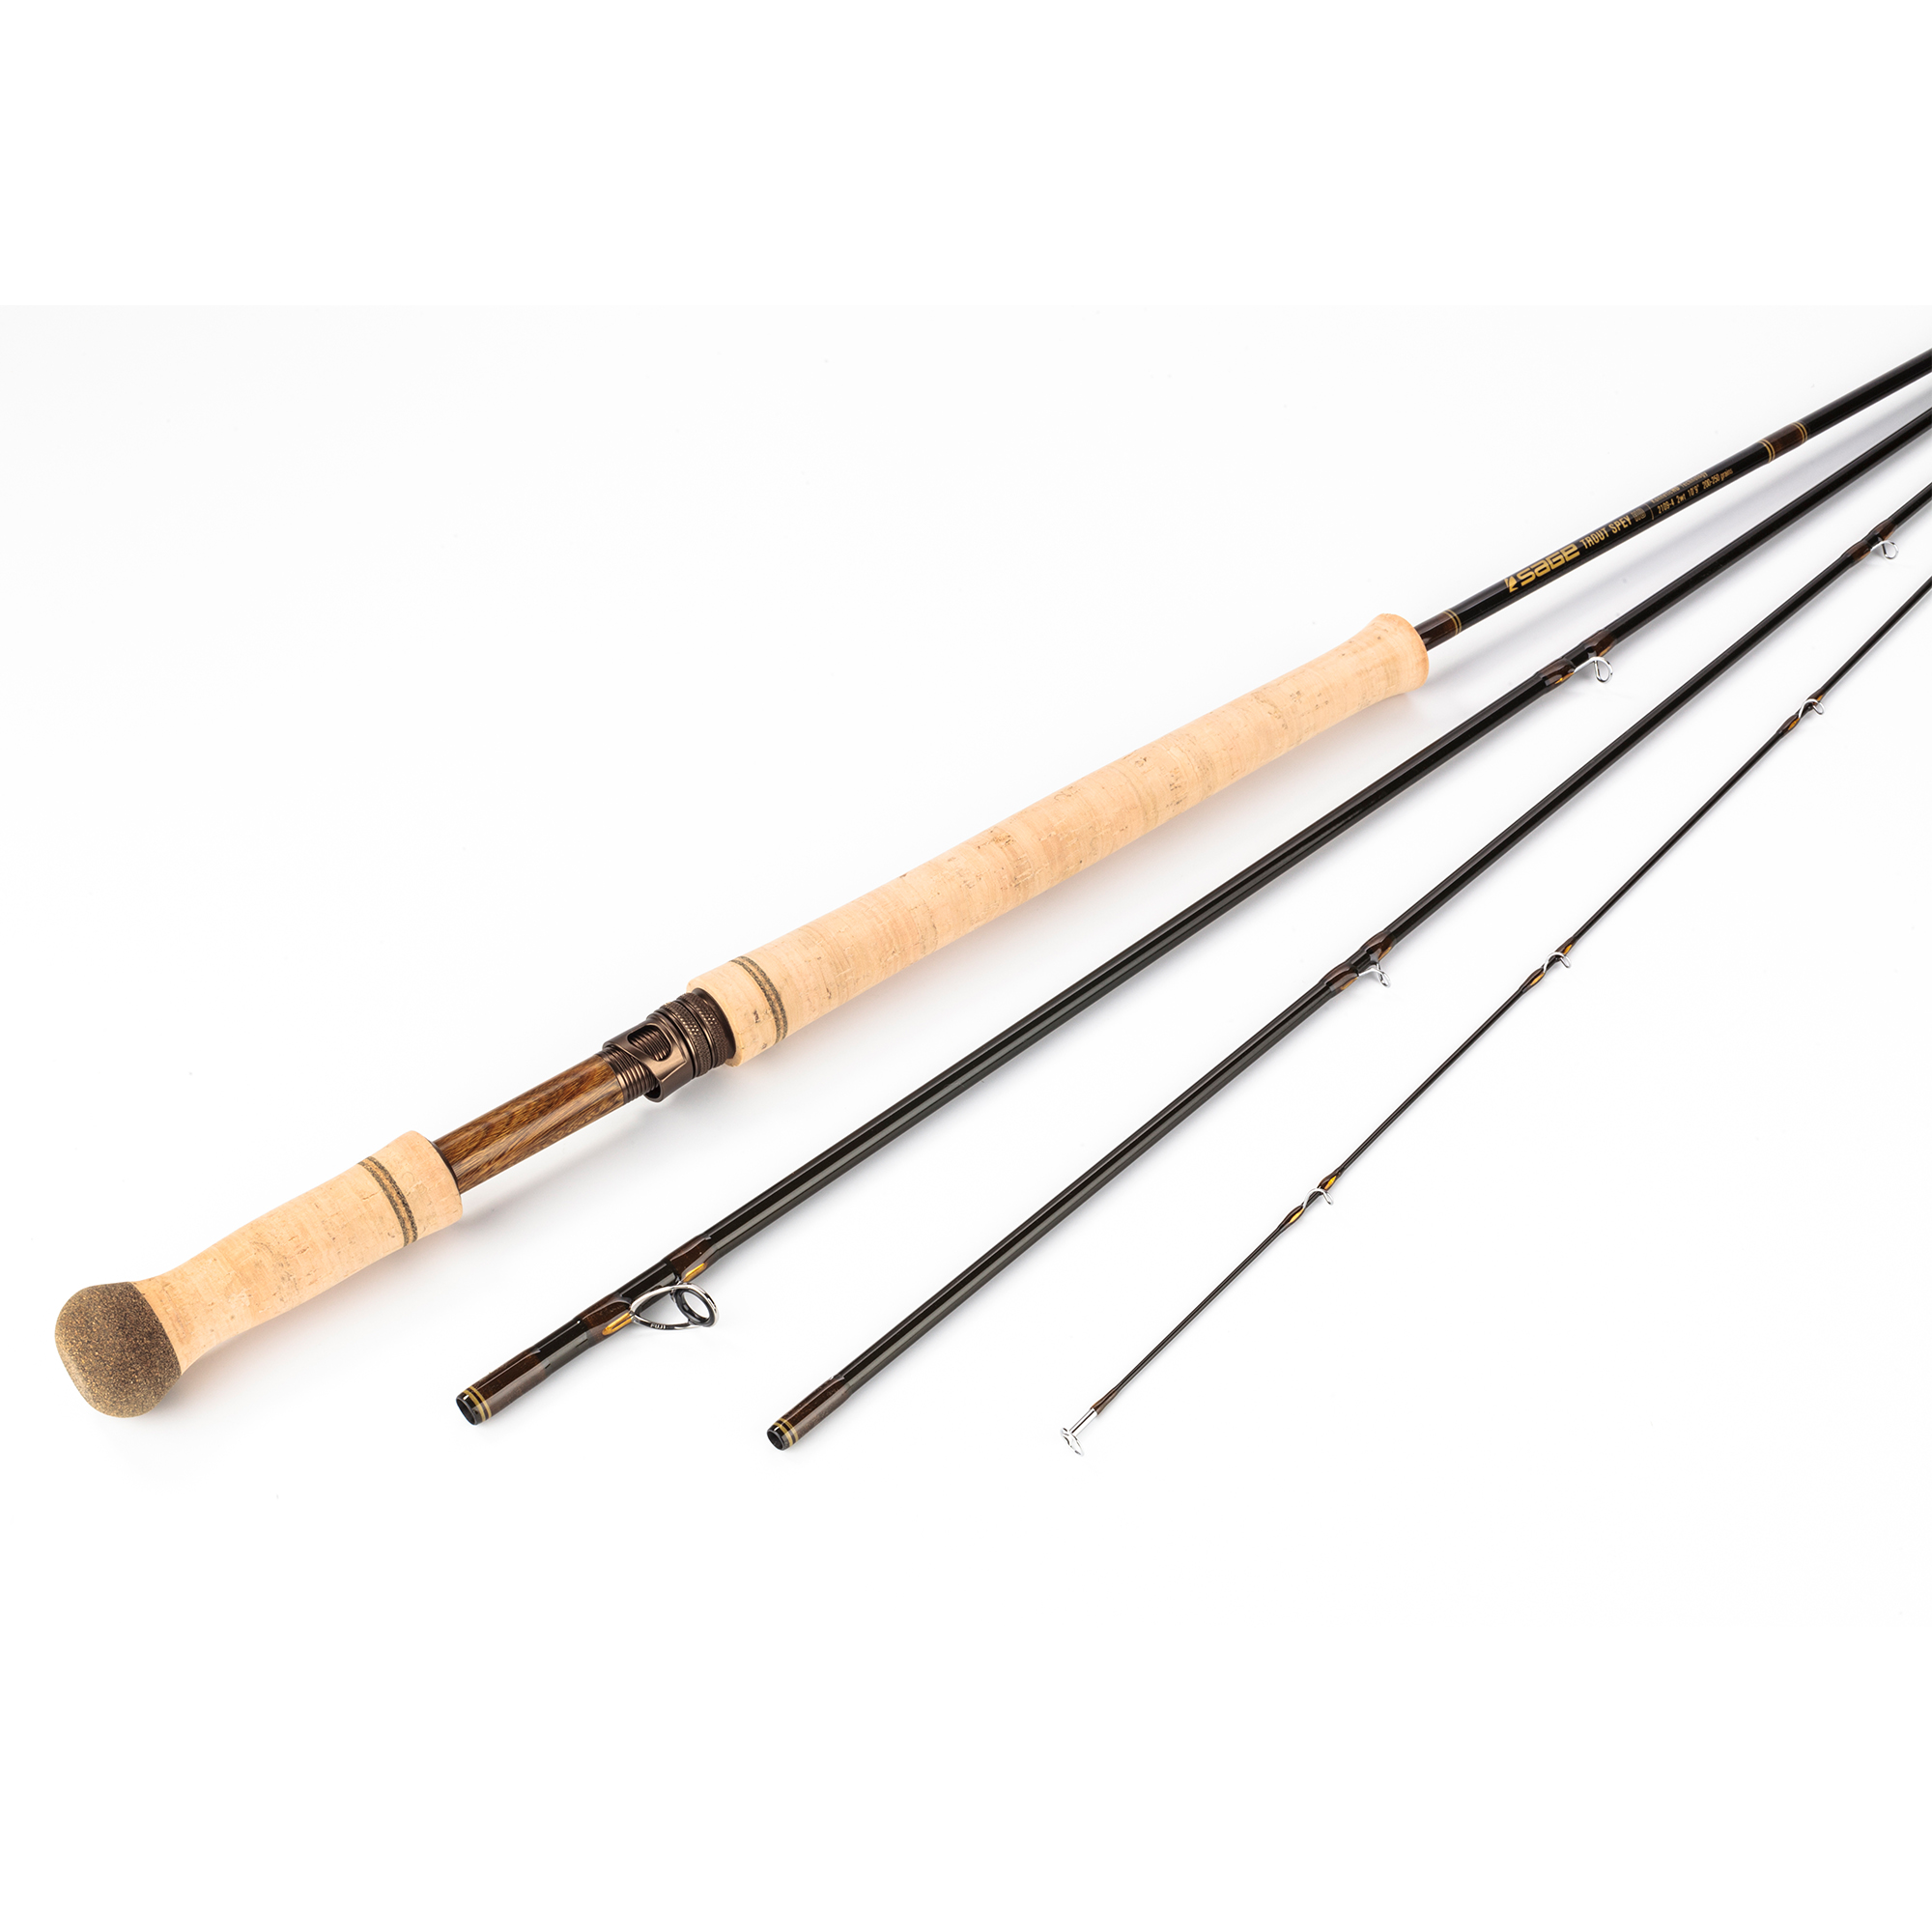 Sage Trout Spey HD Fly Rod – Guide Flyfishing, Fly Fishing Rods, Reels, Sage, Redington, RIO